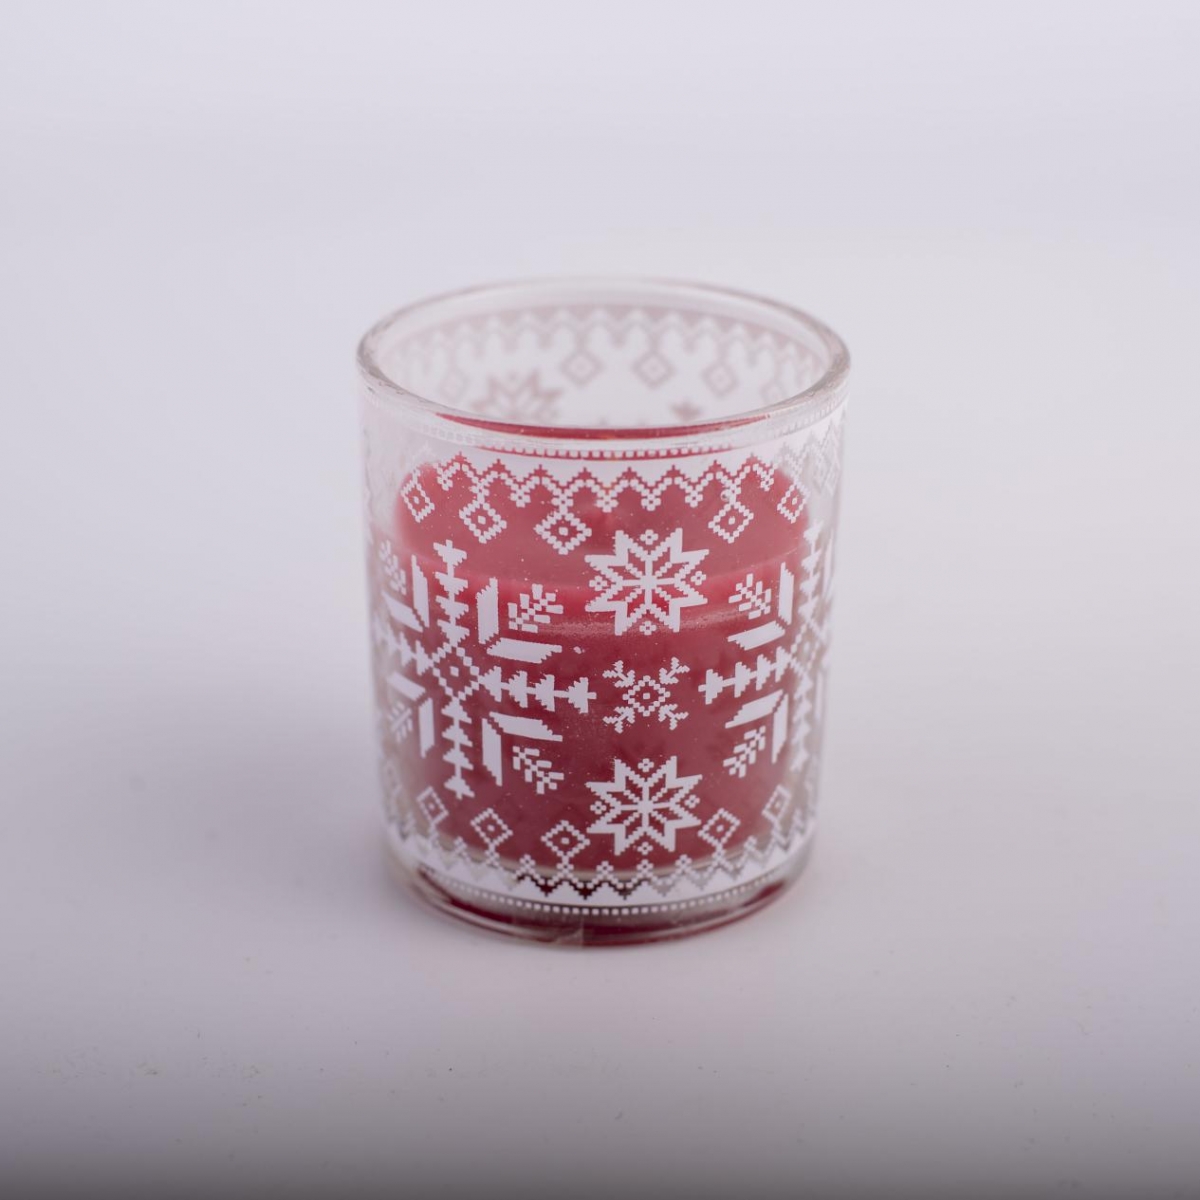 Scented Candles :Christmas Candles, Snowflakes ,Glass Jar Candles,Display Box ,Set 12 ,China Factory ,Cheapest Price-HOWCANDLE-Candles,Scented Candles,Aromatherapy Candles,Soy Candles,Vegan Candles,Jar Candles,Pillar Candles,Candle Gift Sets,Essential Oils,Reed Diffuser,Candle Holder,